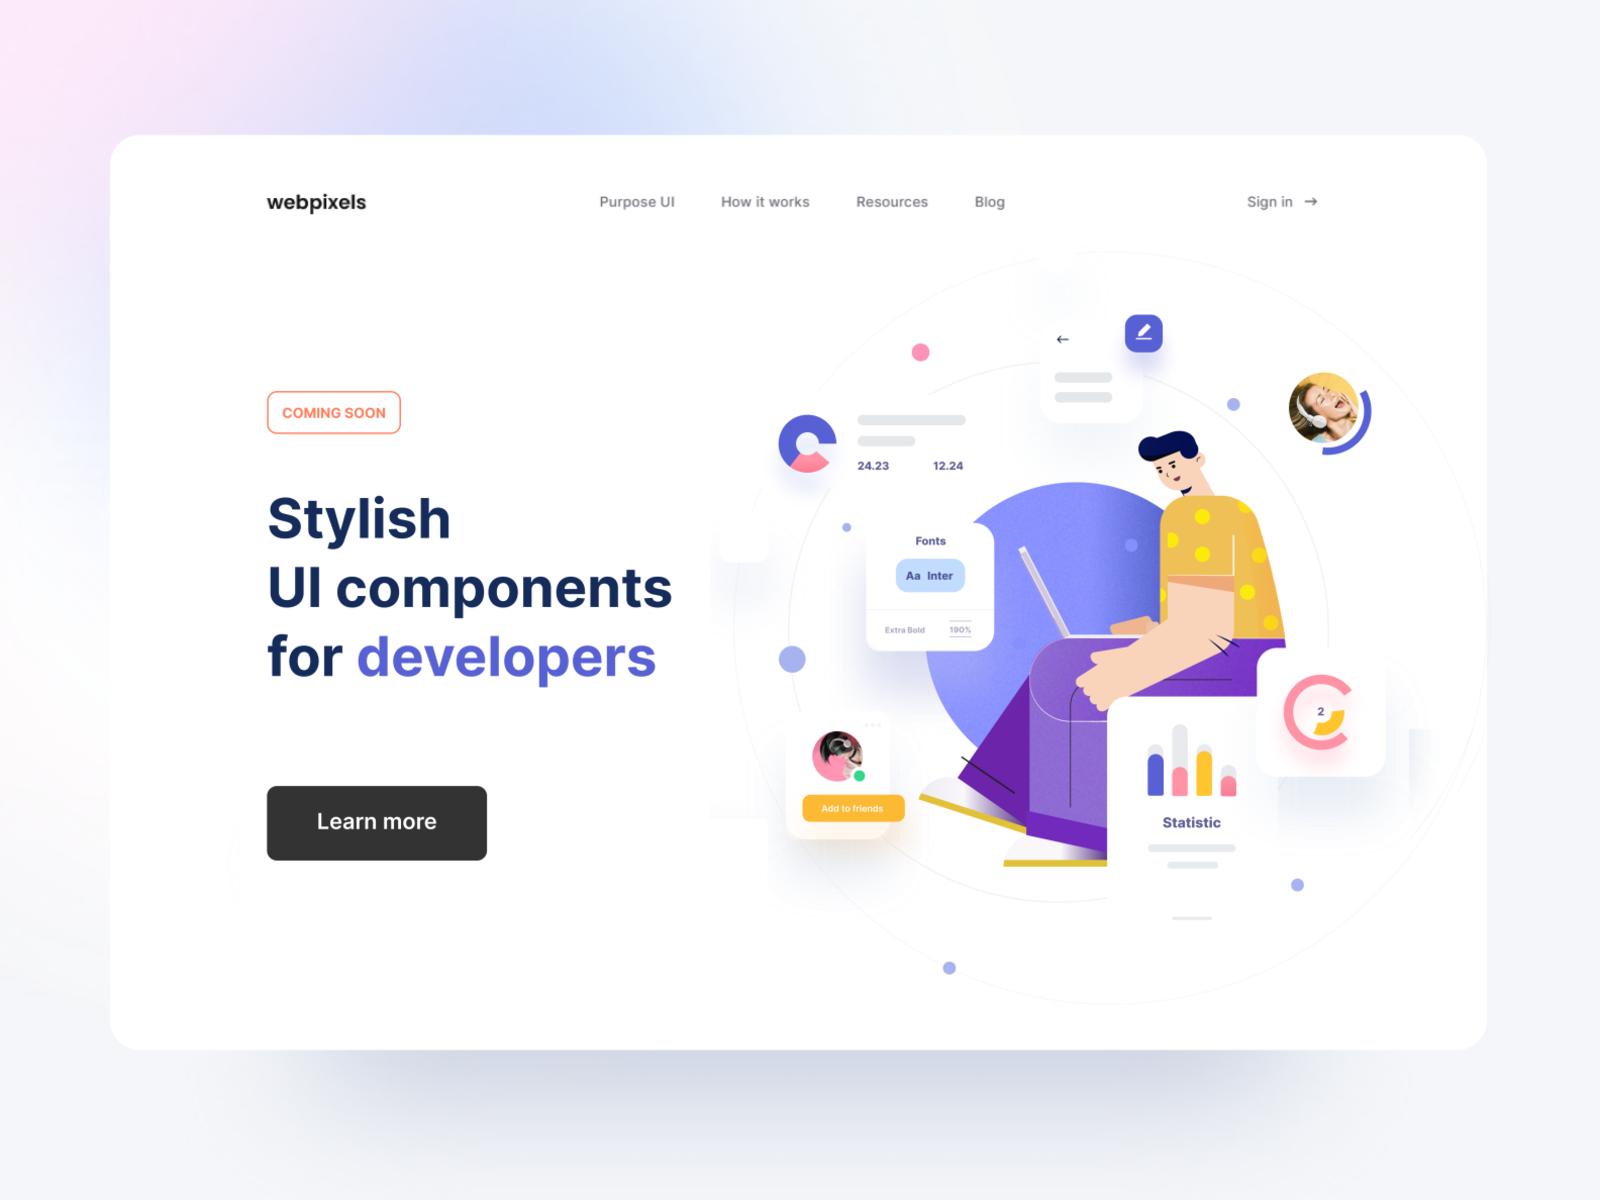 Coming Soon - Stylish UI components for developers